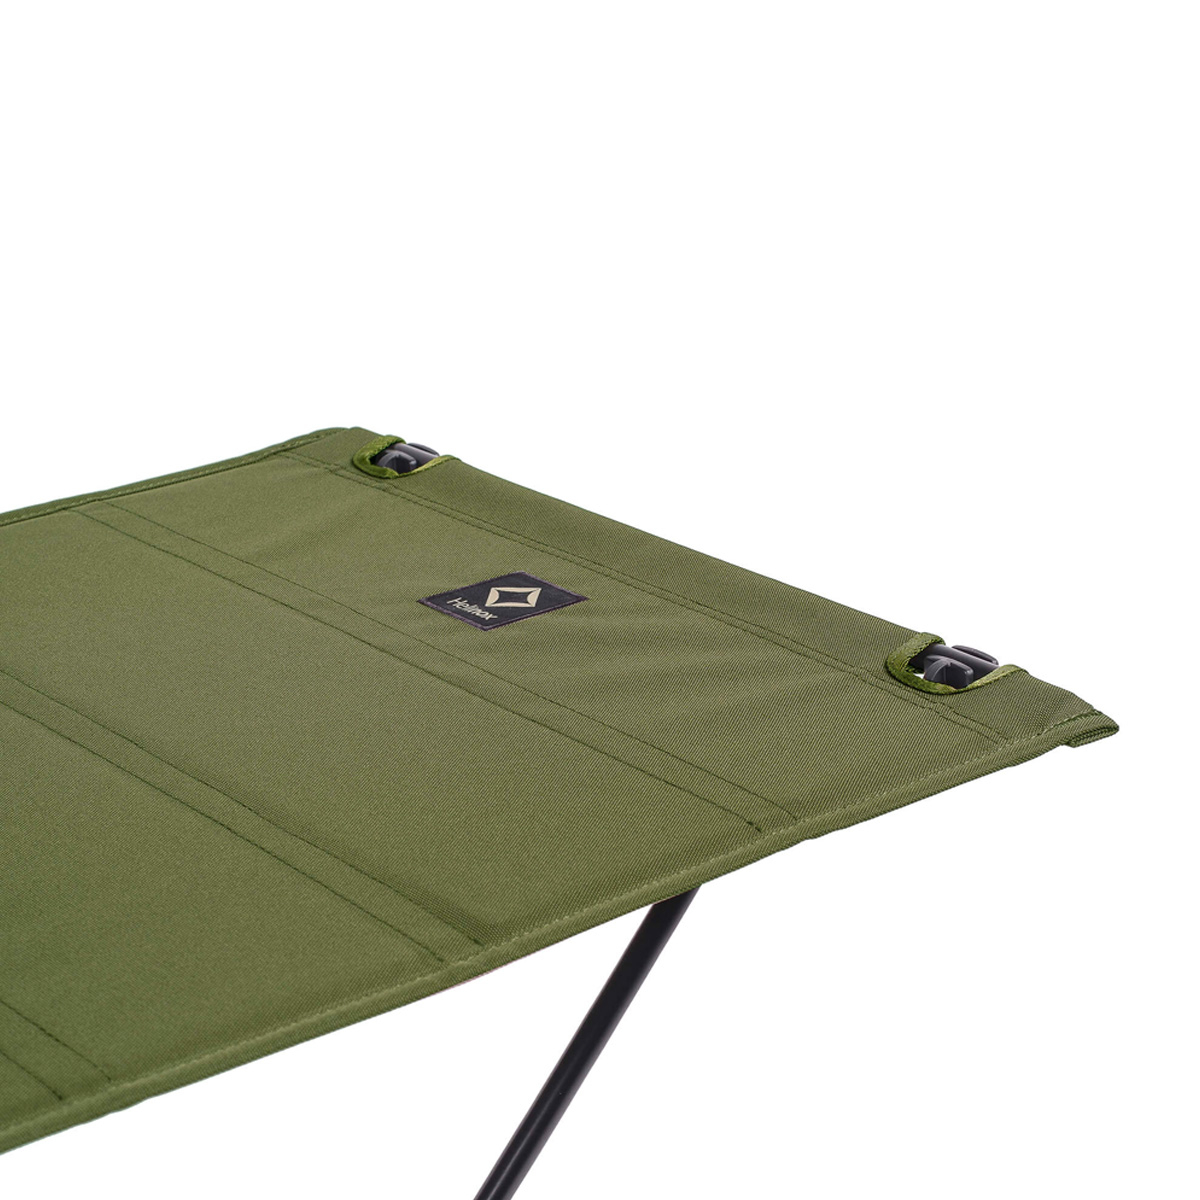 Helinox Tactical Tactical Table Military Olive fabric, bluesign®-certified und recycled 600D polyester